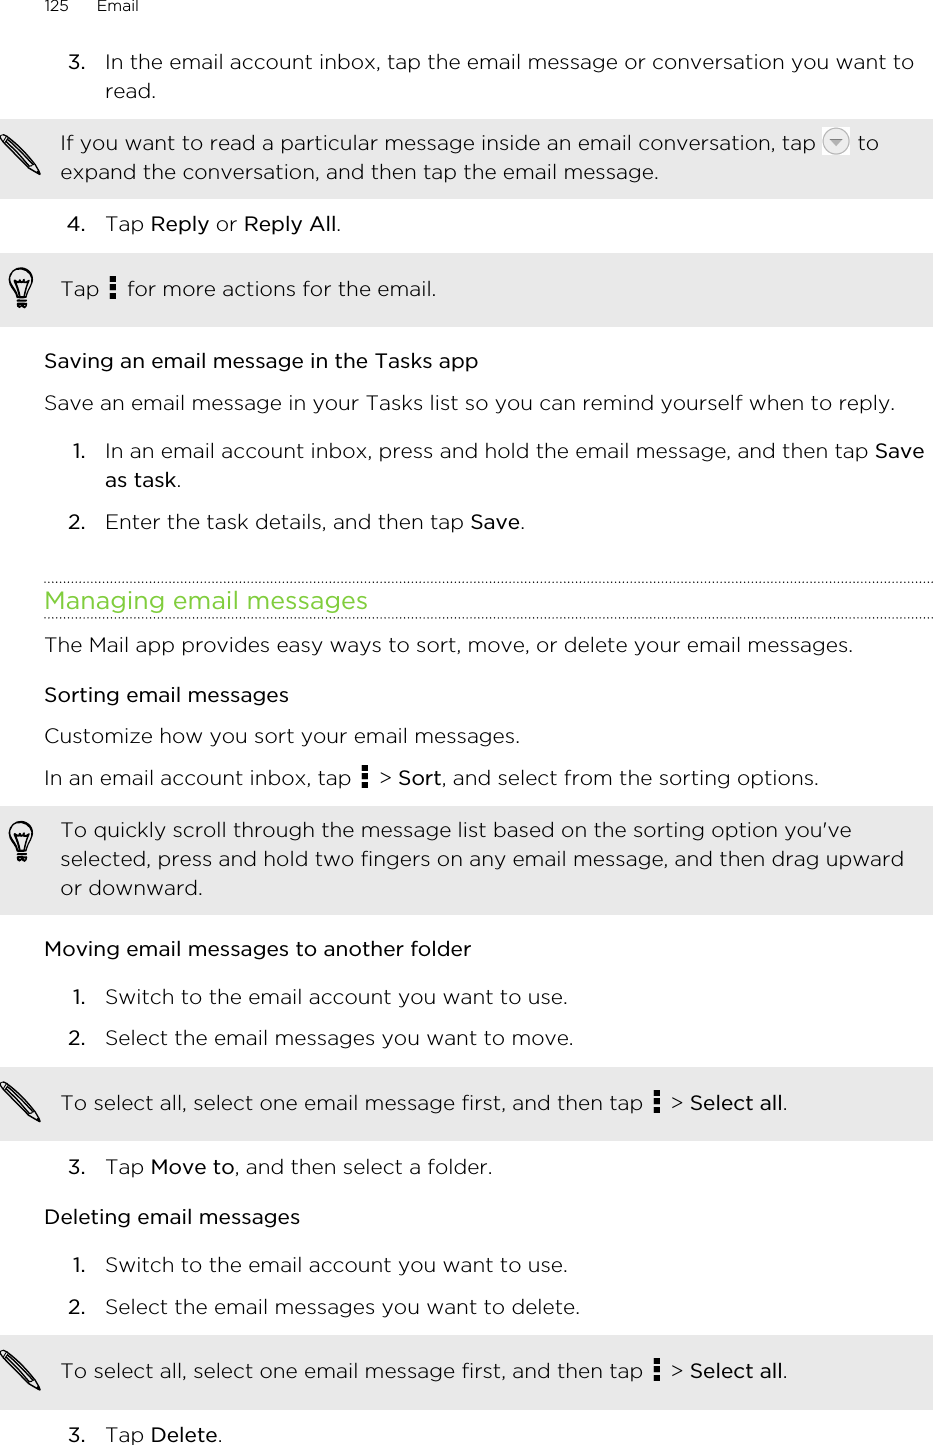 3. In the email account inbox, tap the email message or conversation you want toread. If you want to read a particular message inside an email conversation, tap   toexpand the conversation, and then tap the email message.4. Tap Reply or Reply All. Tap   for more actions for the email.Saving an email message in the Tasks appSave an email message in your Tasks list so you can remind yourself when to reply.1. In an email account inbox, press and hold the email message, and then tap Saveas task.2. Enter the task details, and then tap Save.Managing email messagesThe Mail app provides easy ways to sort, move, or delete your email messages.Sorting email messagesCustomize how you sort your email messages.In an email account inbox, tap   &gt; Sort, and select from the sorting options.To quickly scroll through the message list based on the sorting option you&apos;veselected, press and hold two fingers on any email message, and then drag upwardor downward.Moving email messages to another folder1. Switch to the email account you want to use.2. Select the email messages you want to move. To select all, select one email message first, and then tap   &gt; Select all.3. Tap Move to, and then select a folder.Deleting email messages1. Switch to the email account you want to use.2. Select the email messages you want to delete. To select all, select one email message first, and then tap   &gt; Select all.3. Tap Delete.125 EmailHTC Confidential for Certification HTC Confidential for Certification